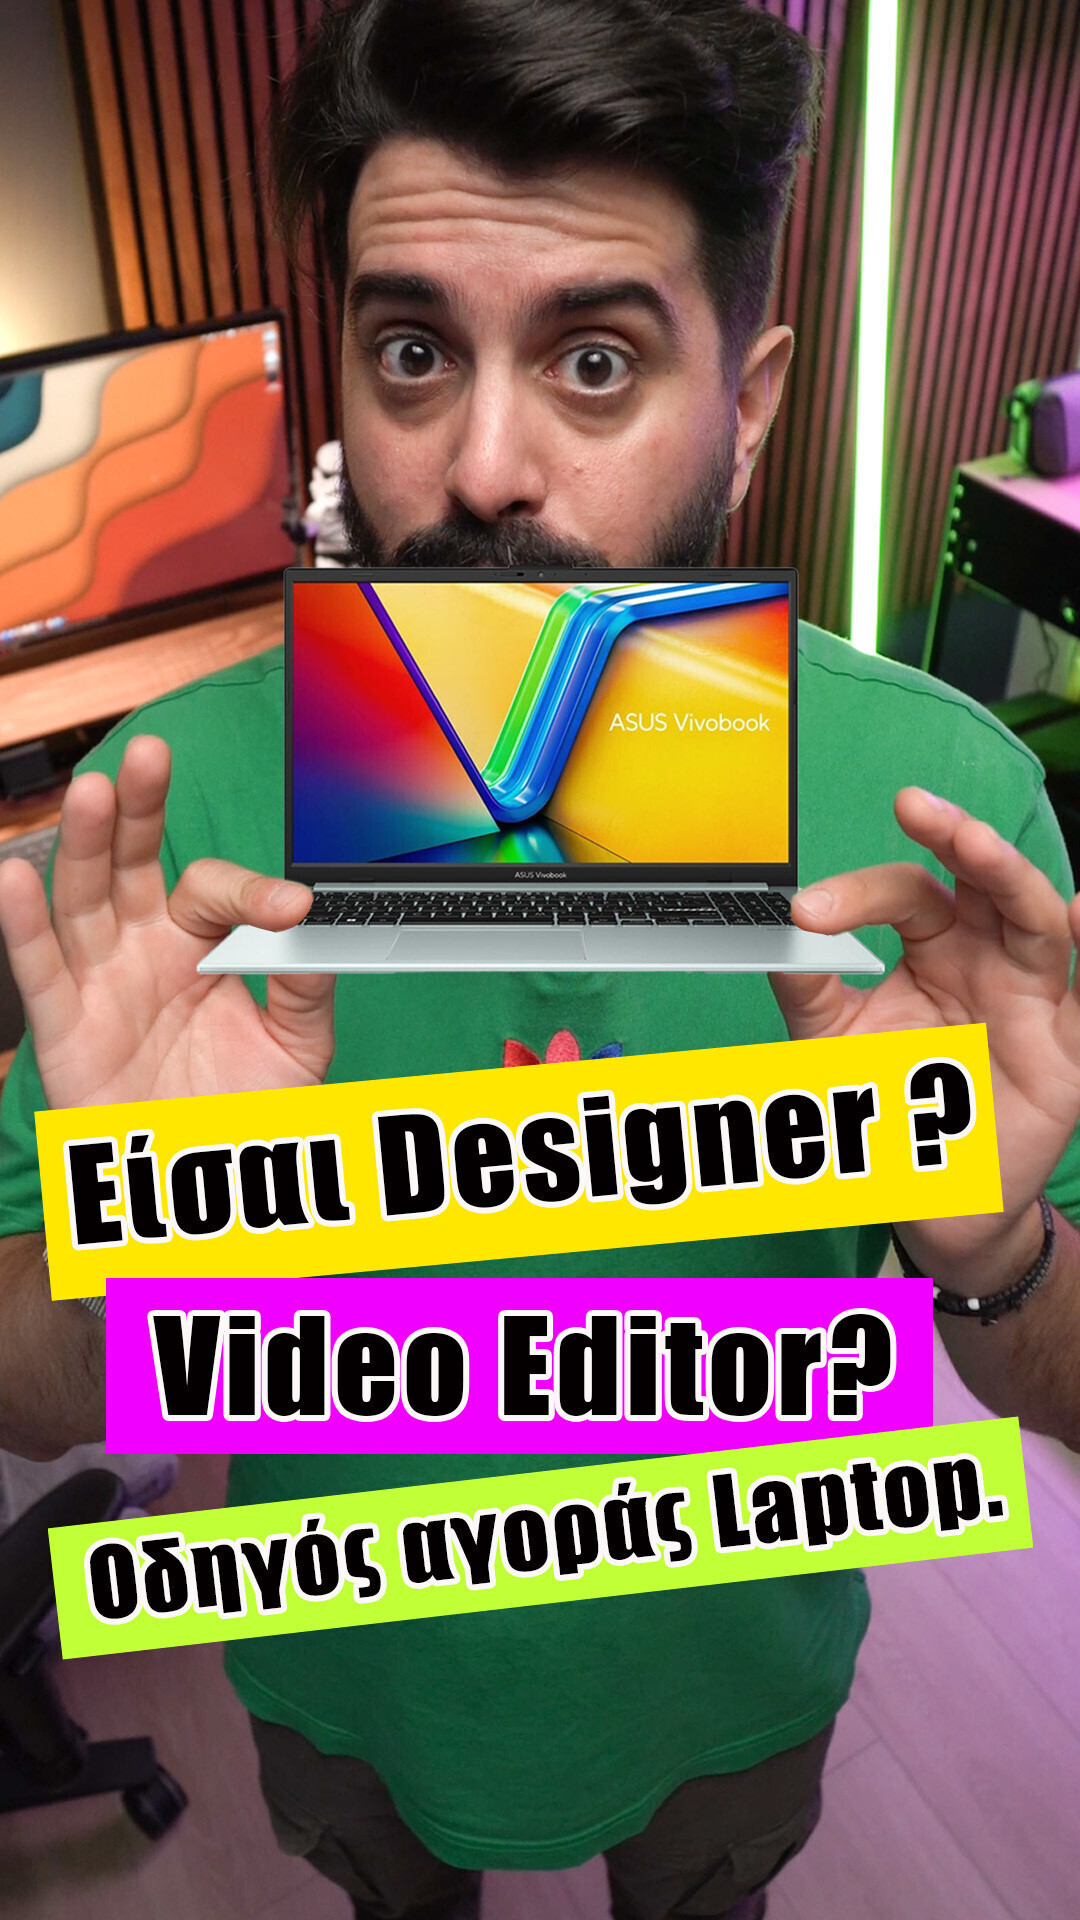 Looking for a laptop for Video & Design applications? Watch the video!